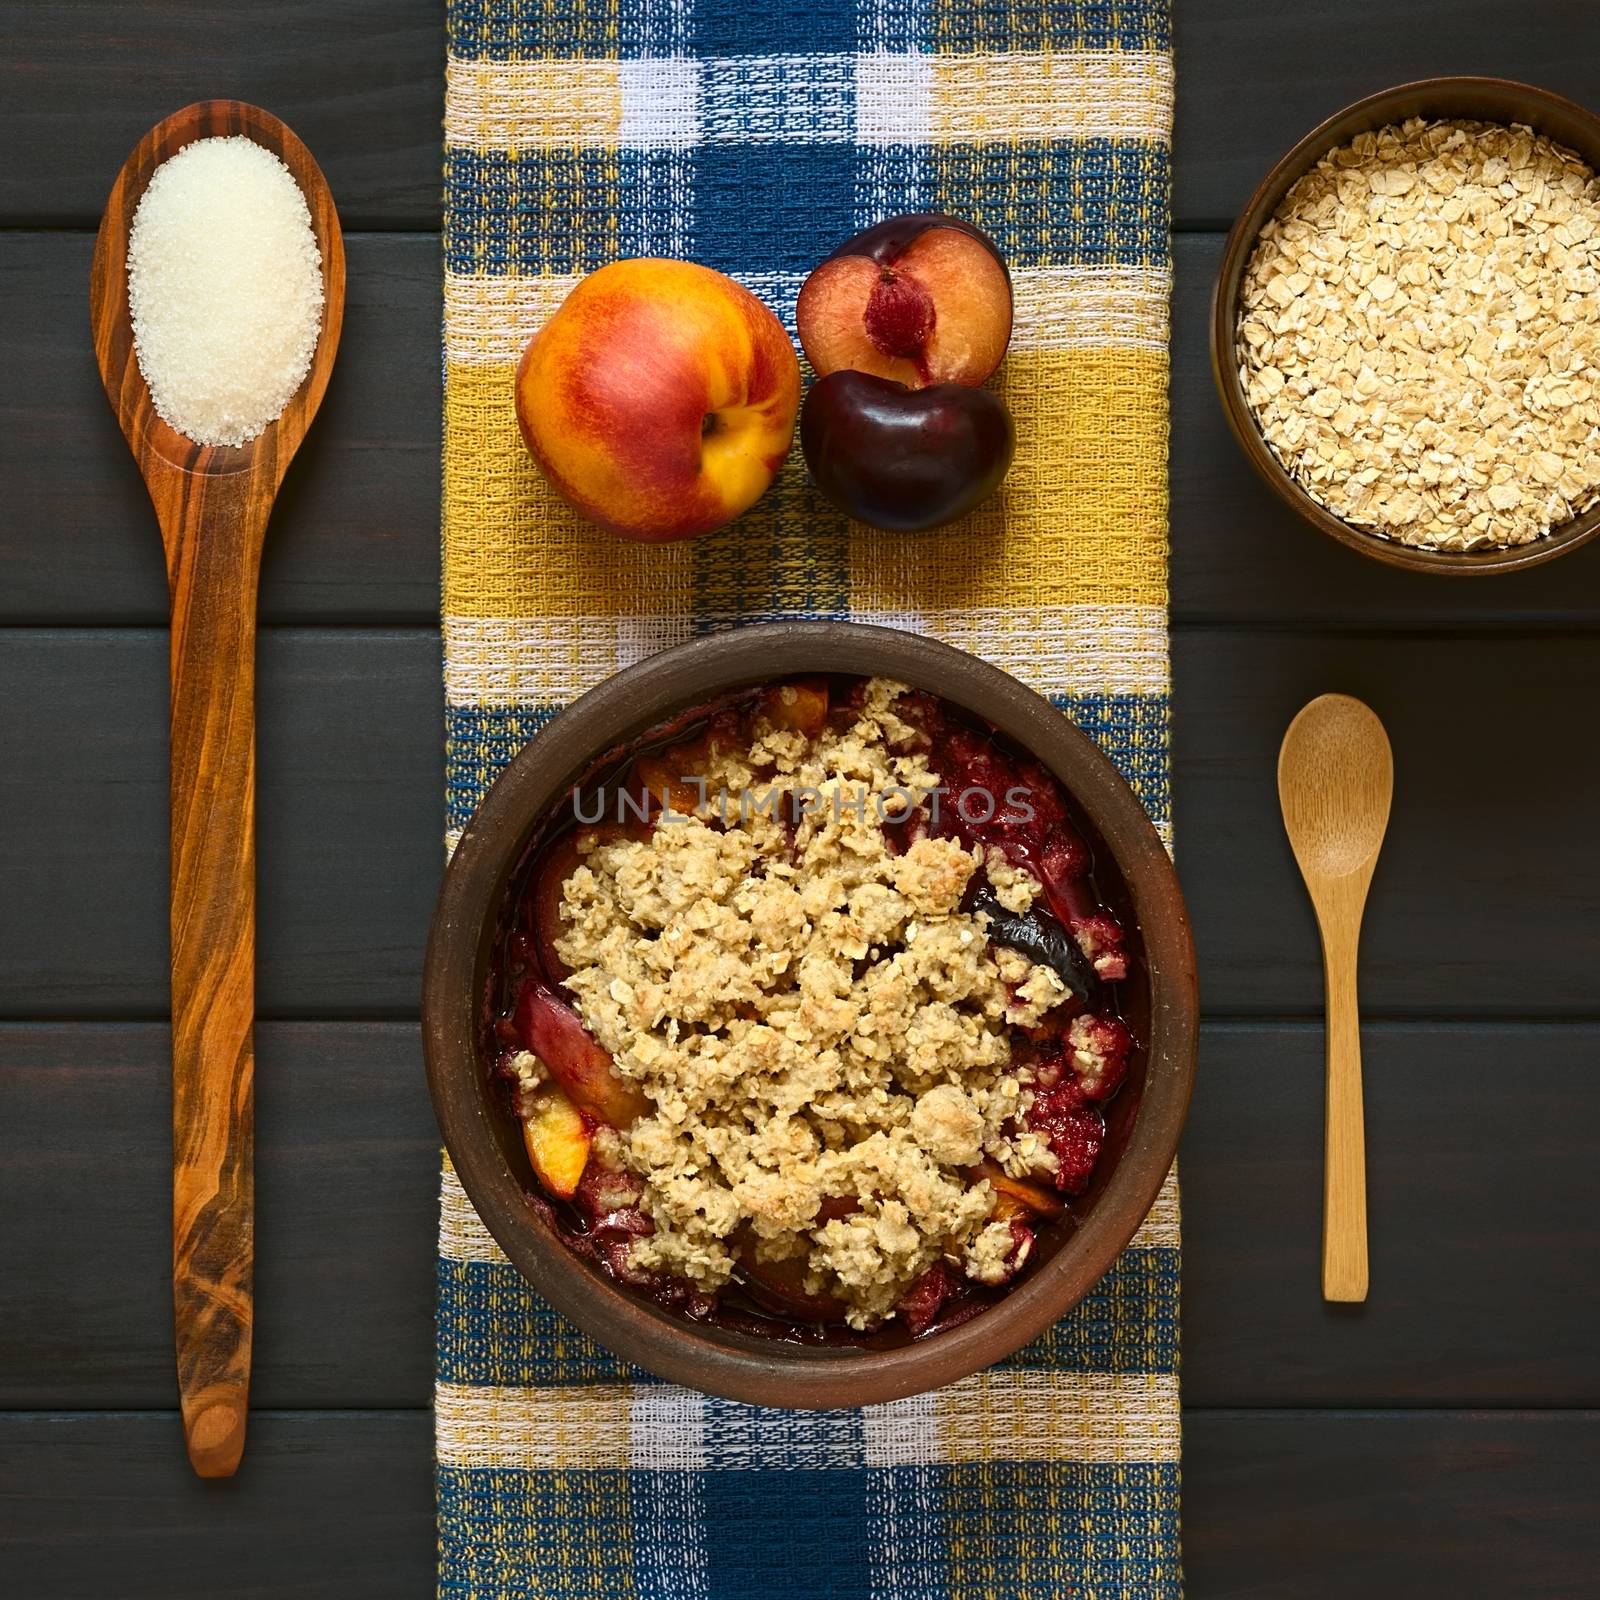 Overhead shot of a rustic bowl filled with baked plum and nectarine crumble or crisp with ingredients on the side, photographed on dark wood with natural light